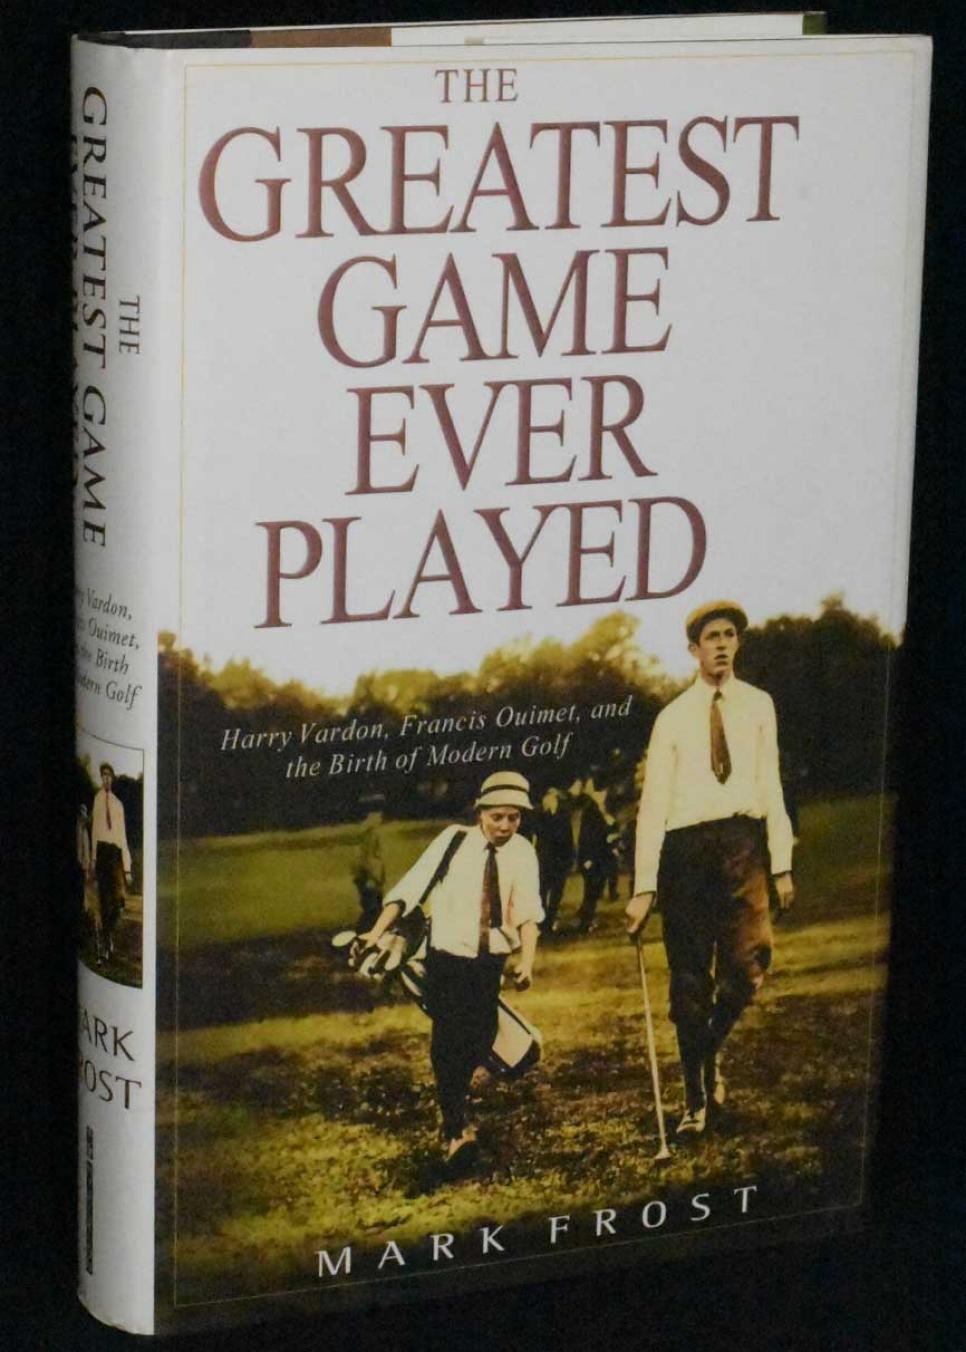 /content/dam/images/golfdigest/fullset/2022/6/the-greatest-game-ever-played-book-cover-hardcover-mark-frost.jpg